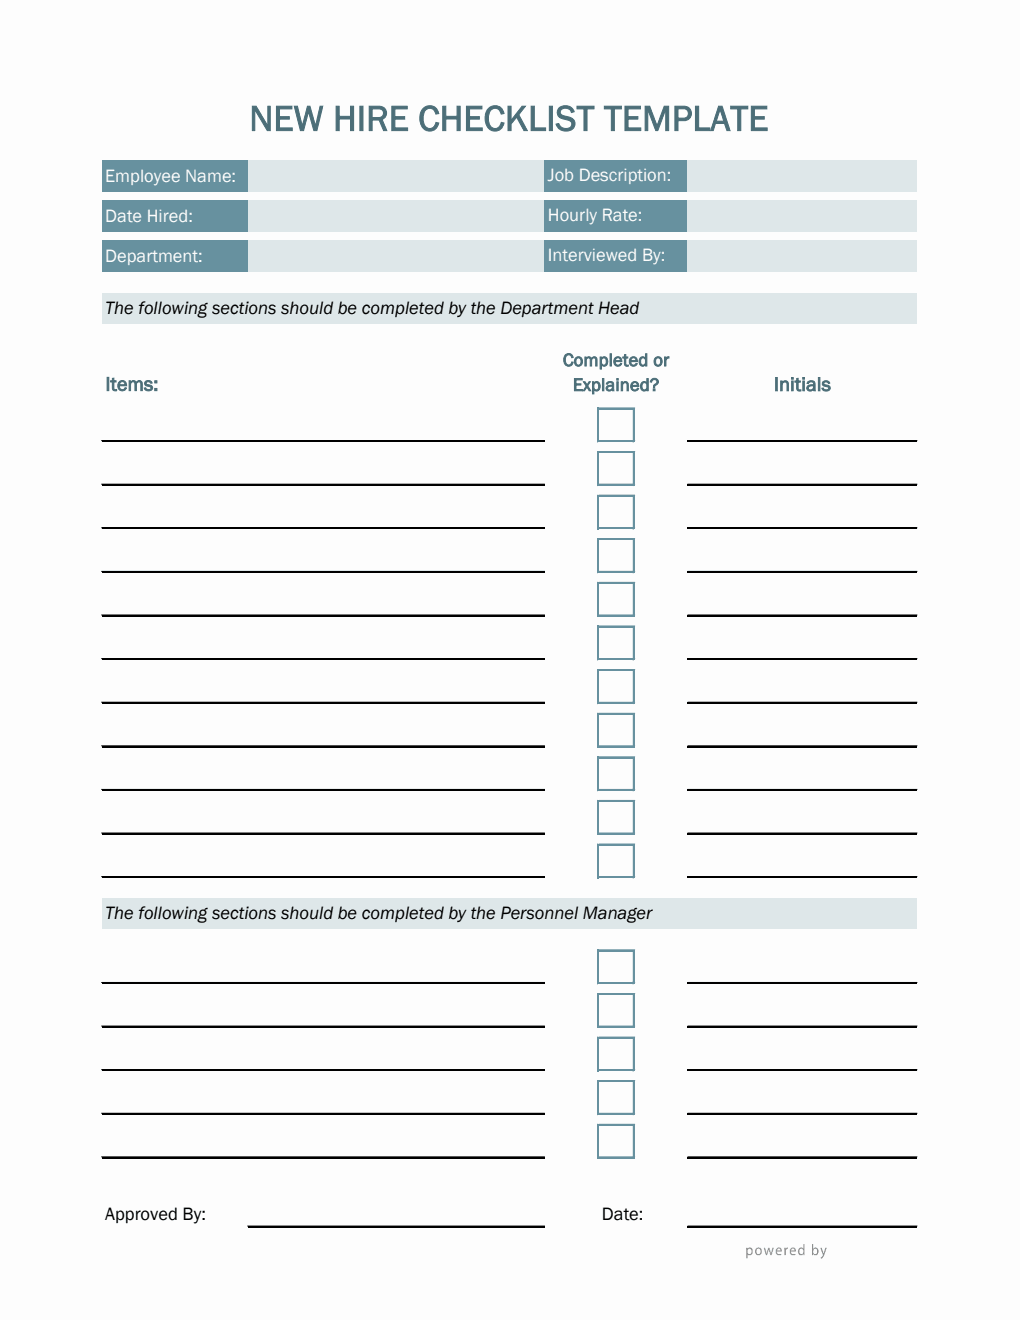 New Hire Checklist Template in Excel